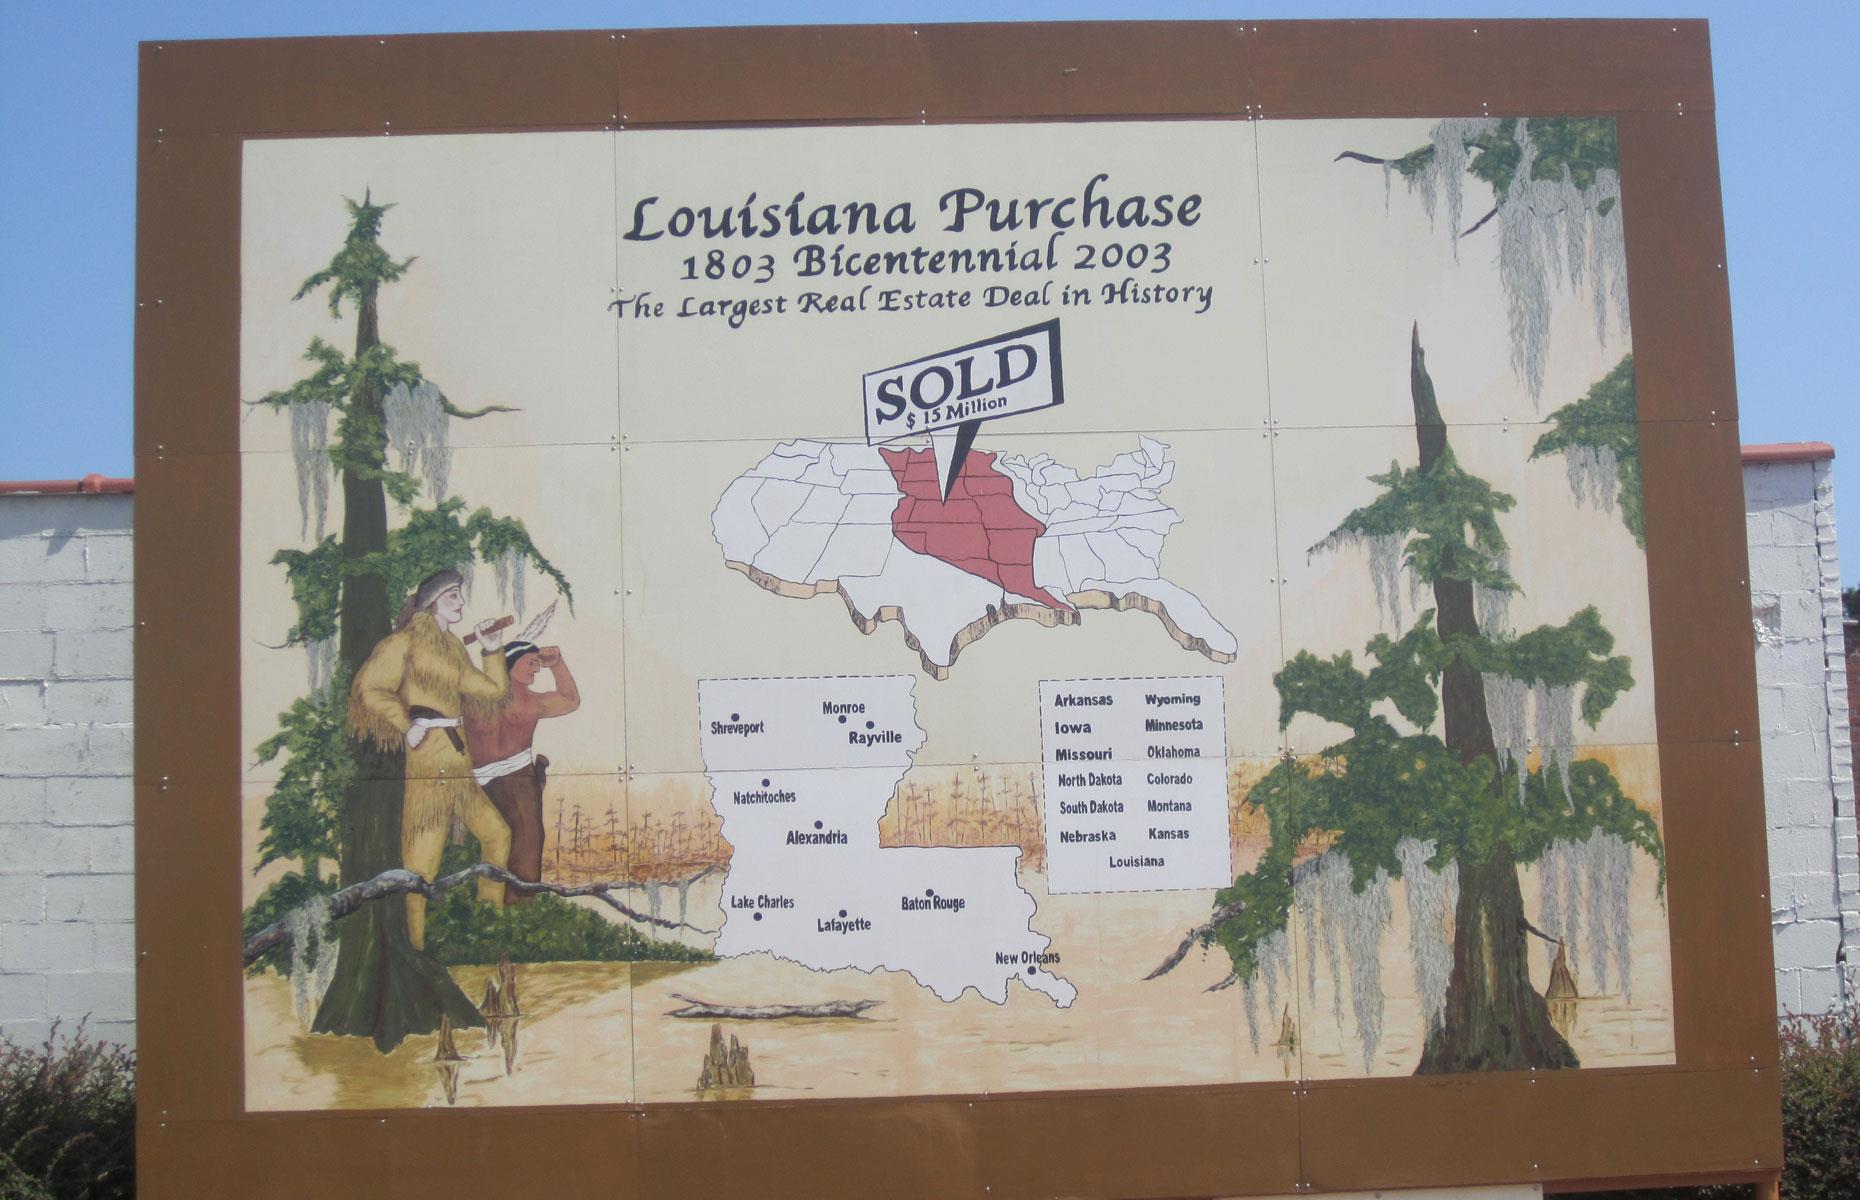 America's purchase of the Louisiana Territory from France, 1803